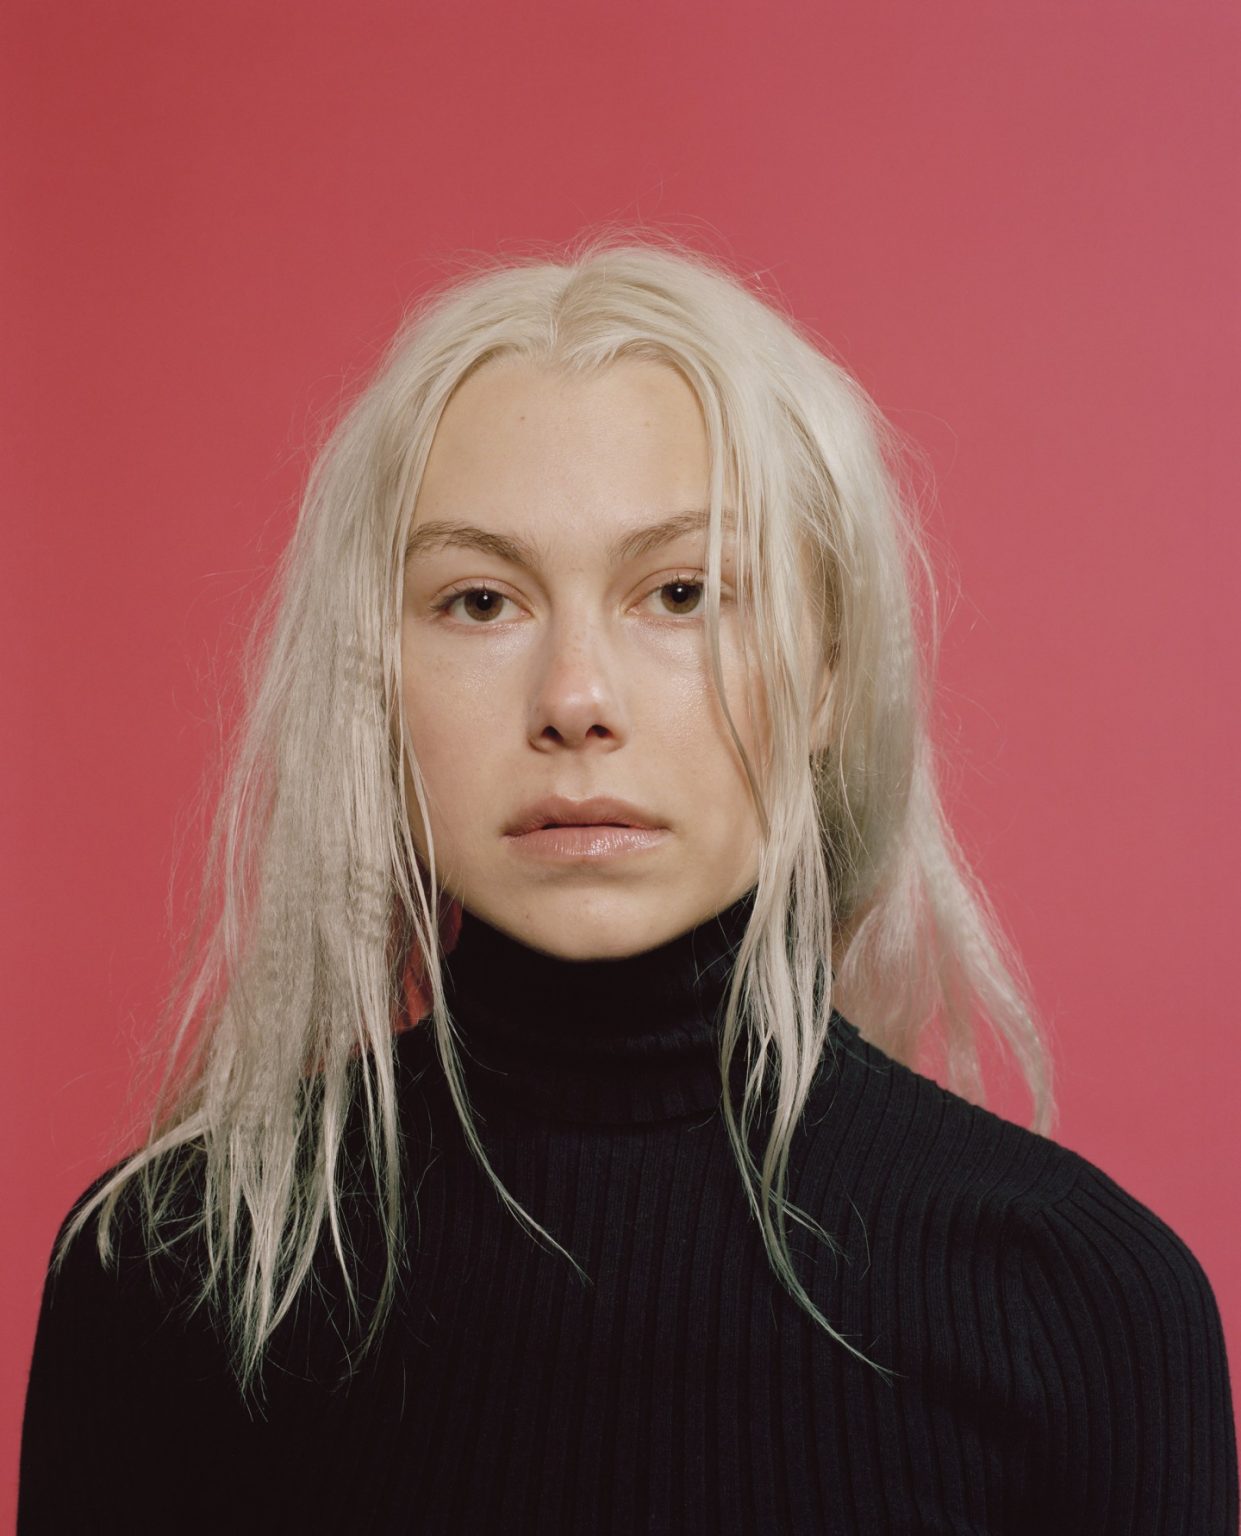 Everything You Need to Know About Phoebe Bridgers’ 2021 Tour Groovy